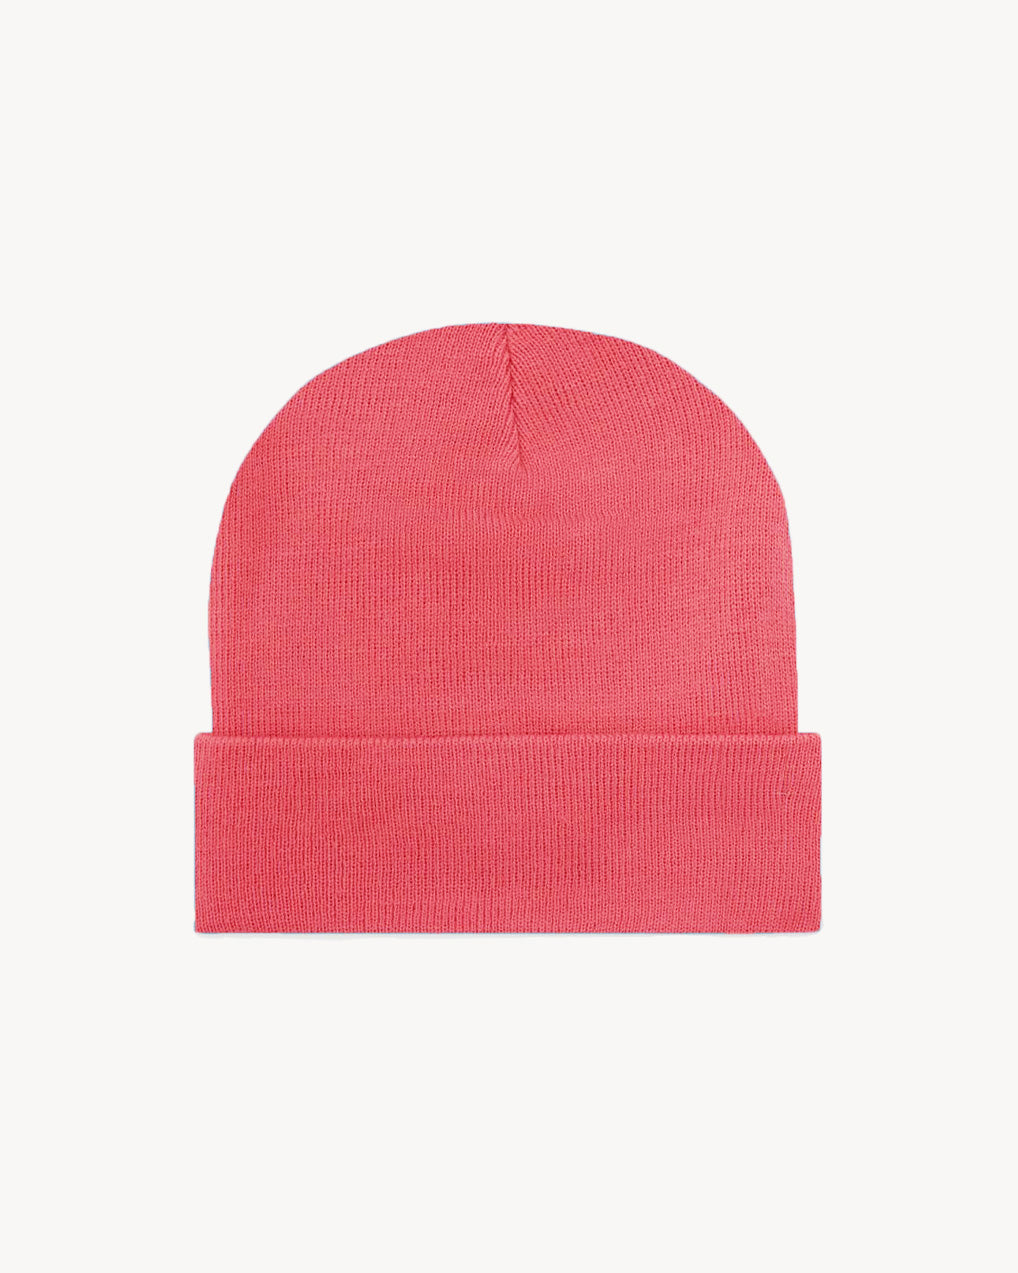 CORAL HAT | MINI CURLY INITIAL